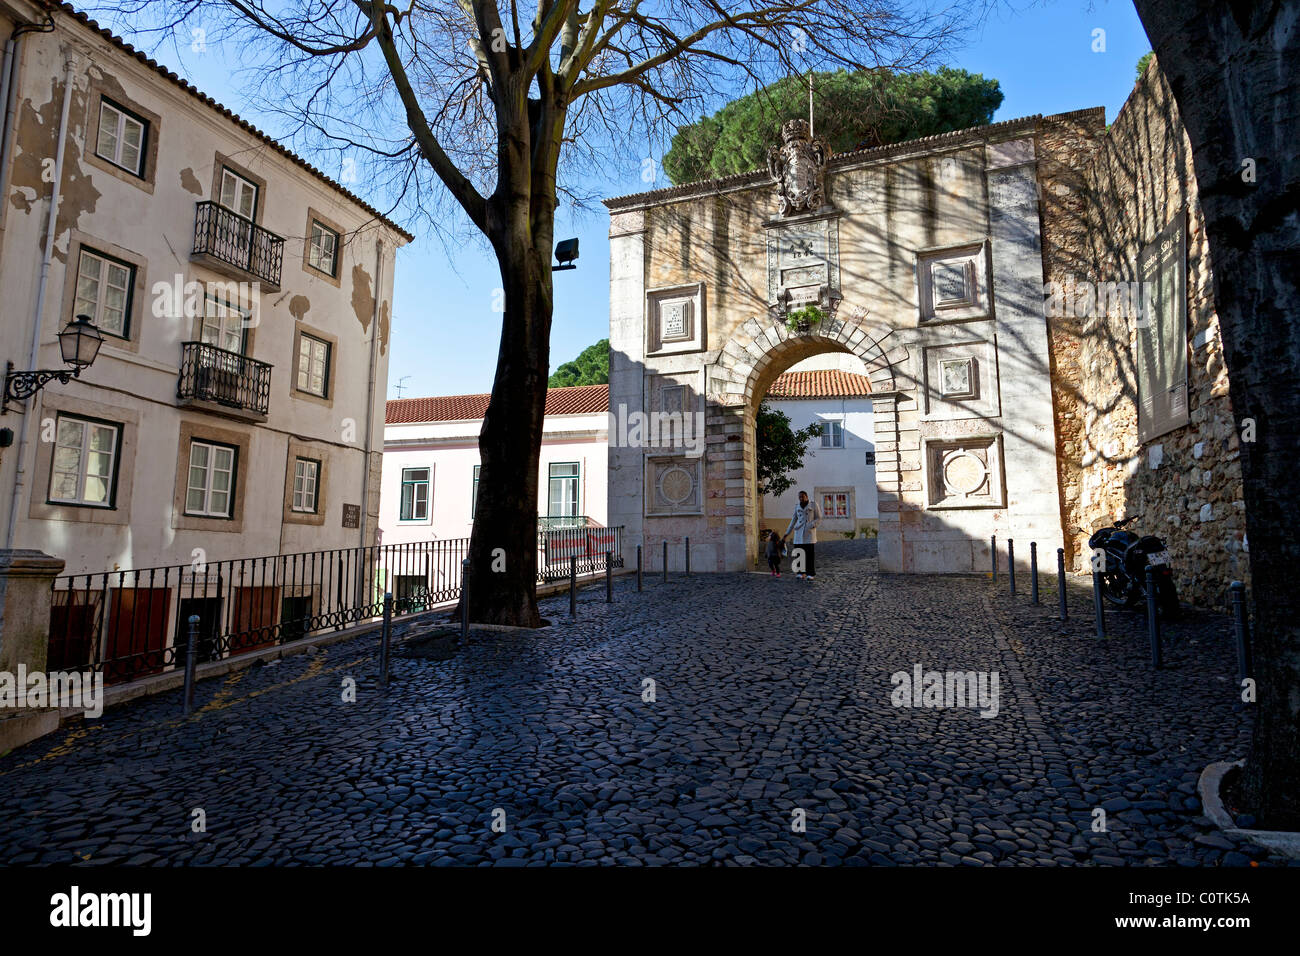 Entrance of Sao Jorge (St. George) Castle in Lisbon, Portugal. Stock Photo